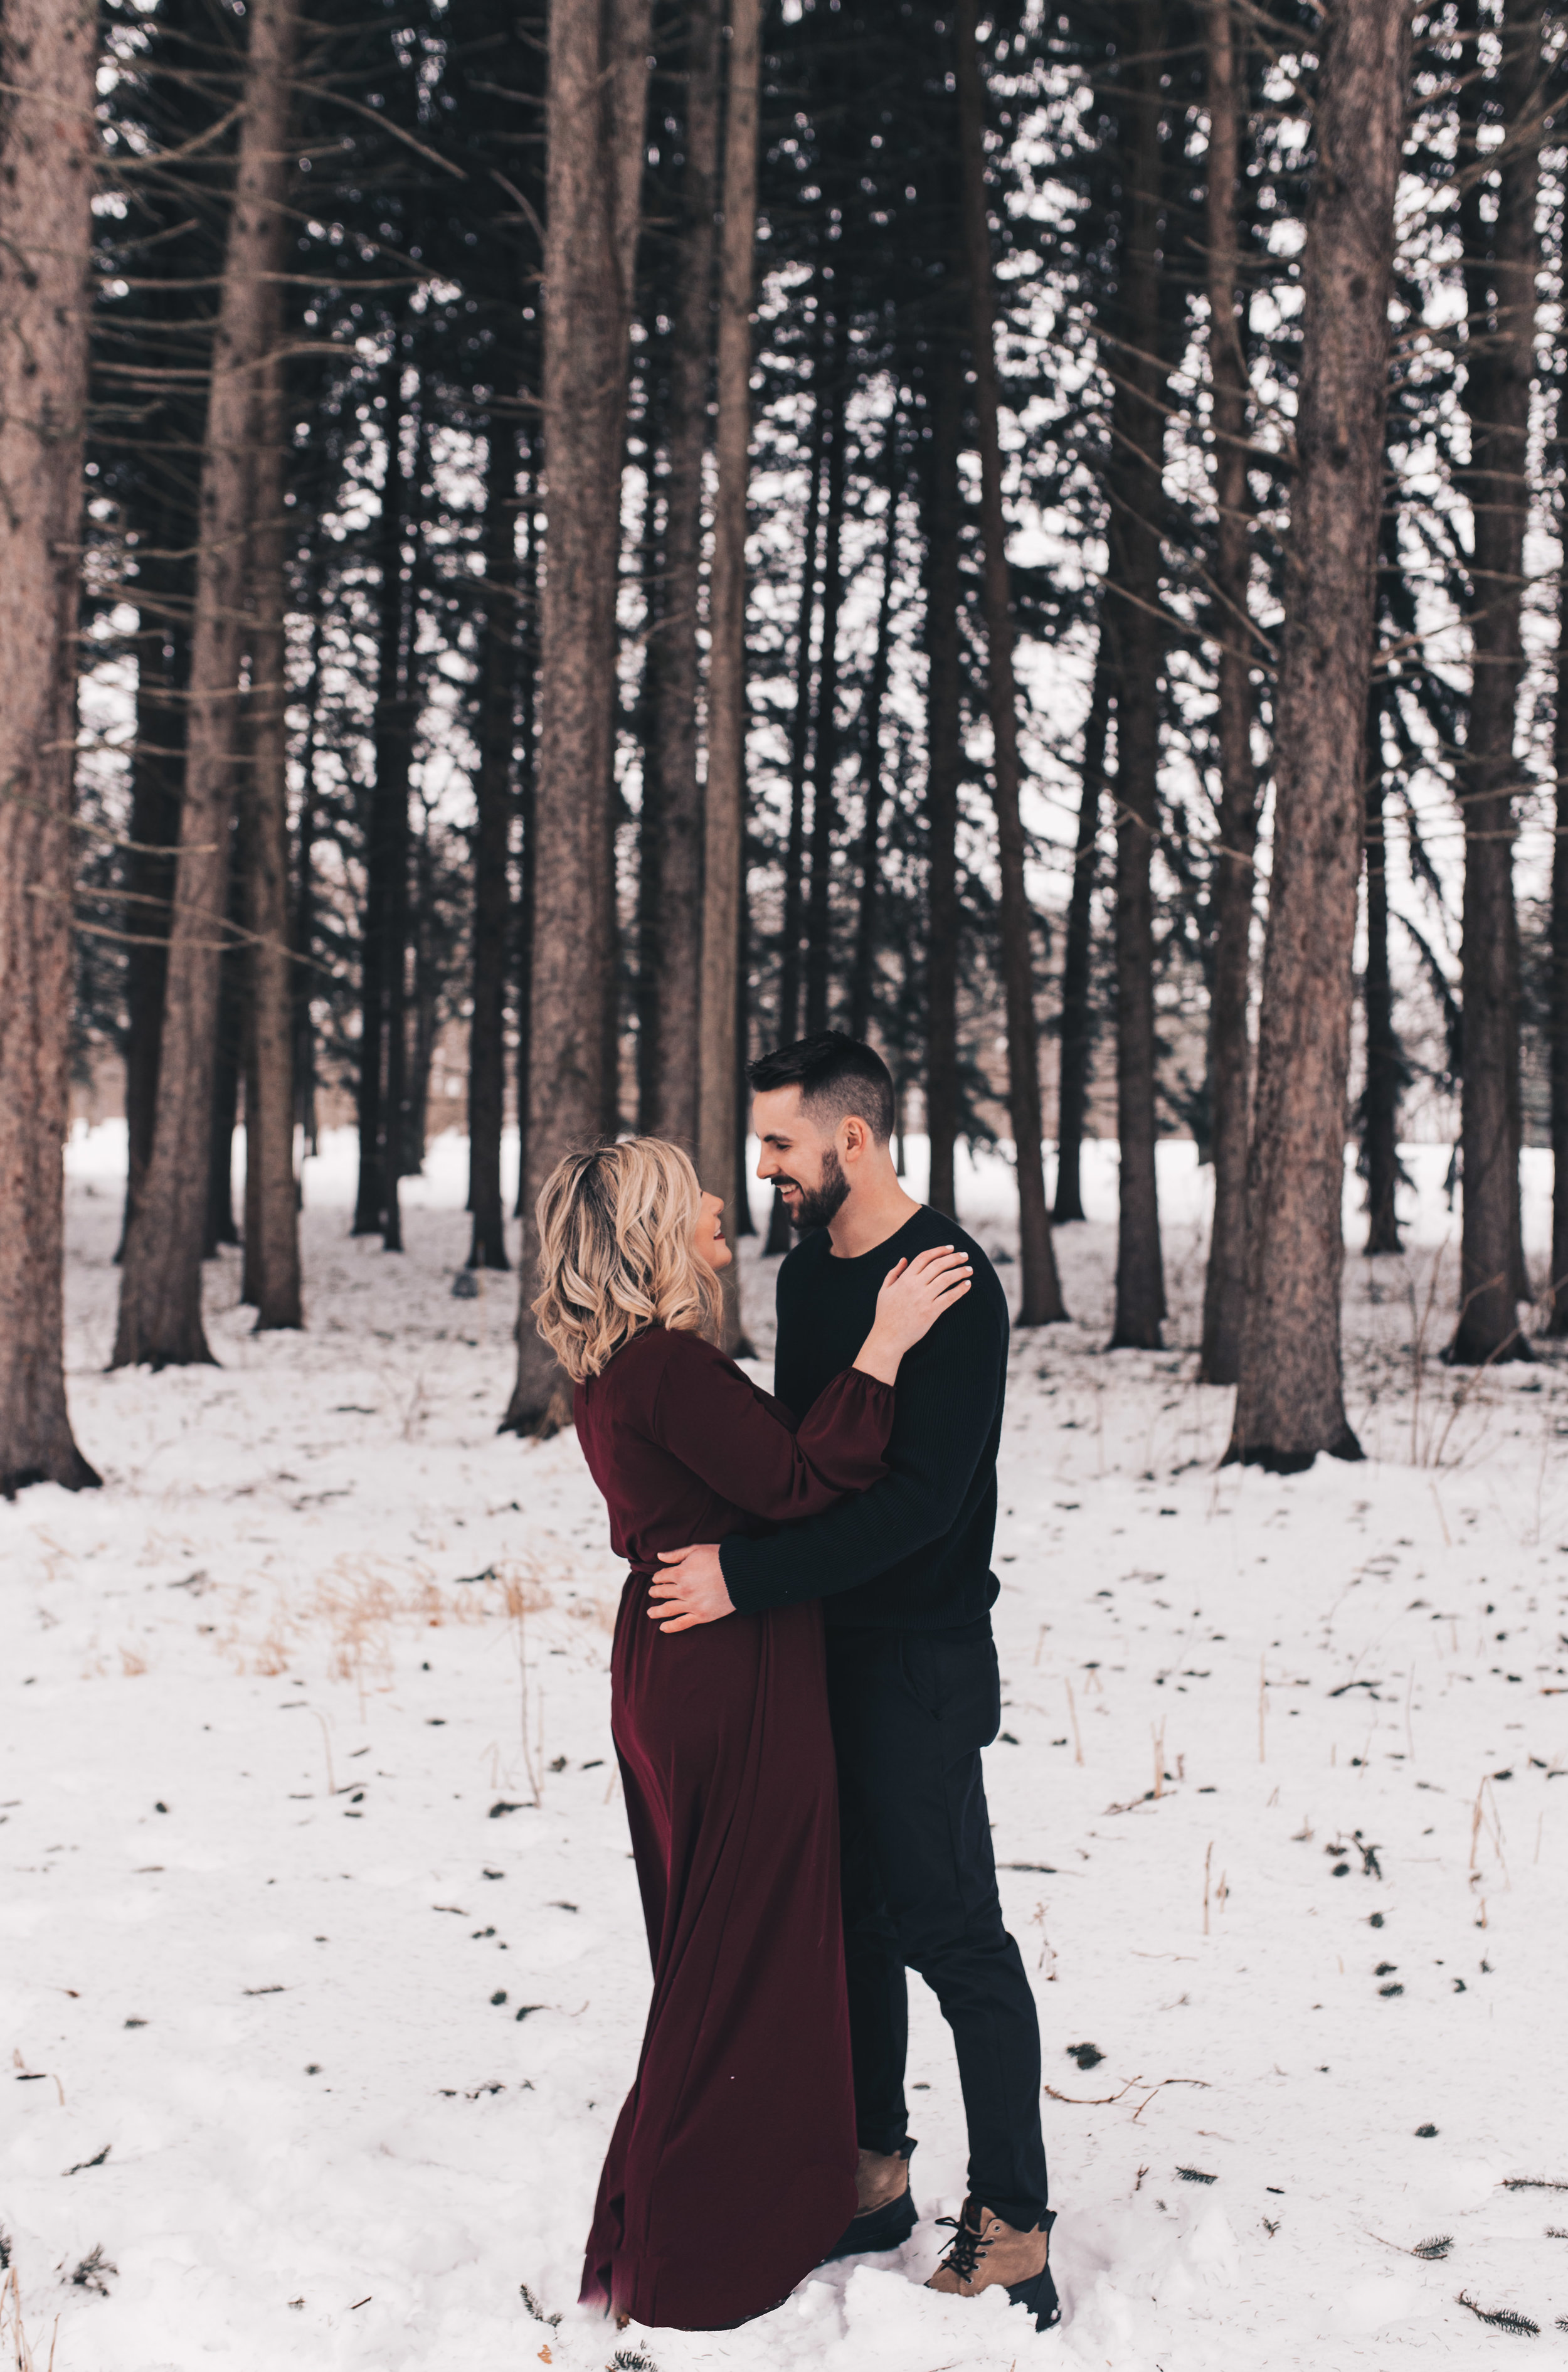 Winter Couples Session, Outdoor Winter Engagement Session, Woodsy Adventurous Couples Session, Illinois Wedding Photographer, Illinois Couples Photographer, Illinois Engagement Photographer